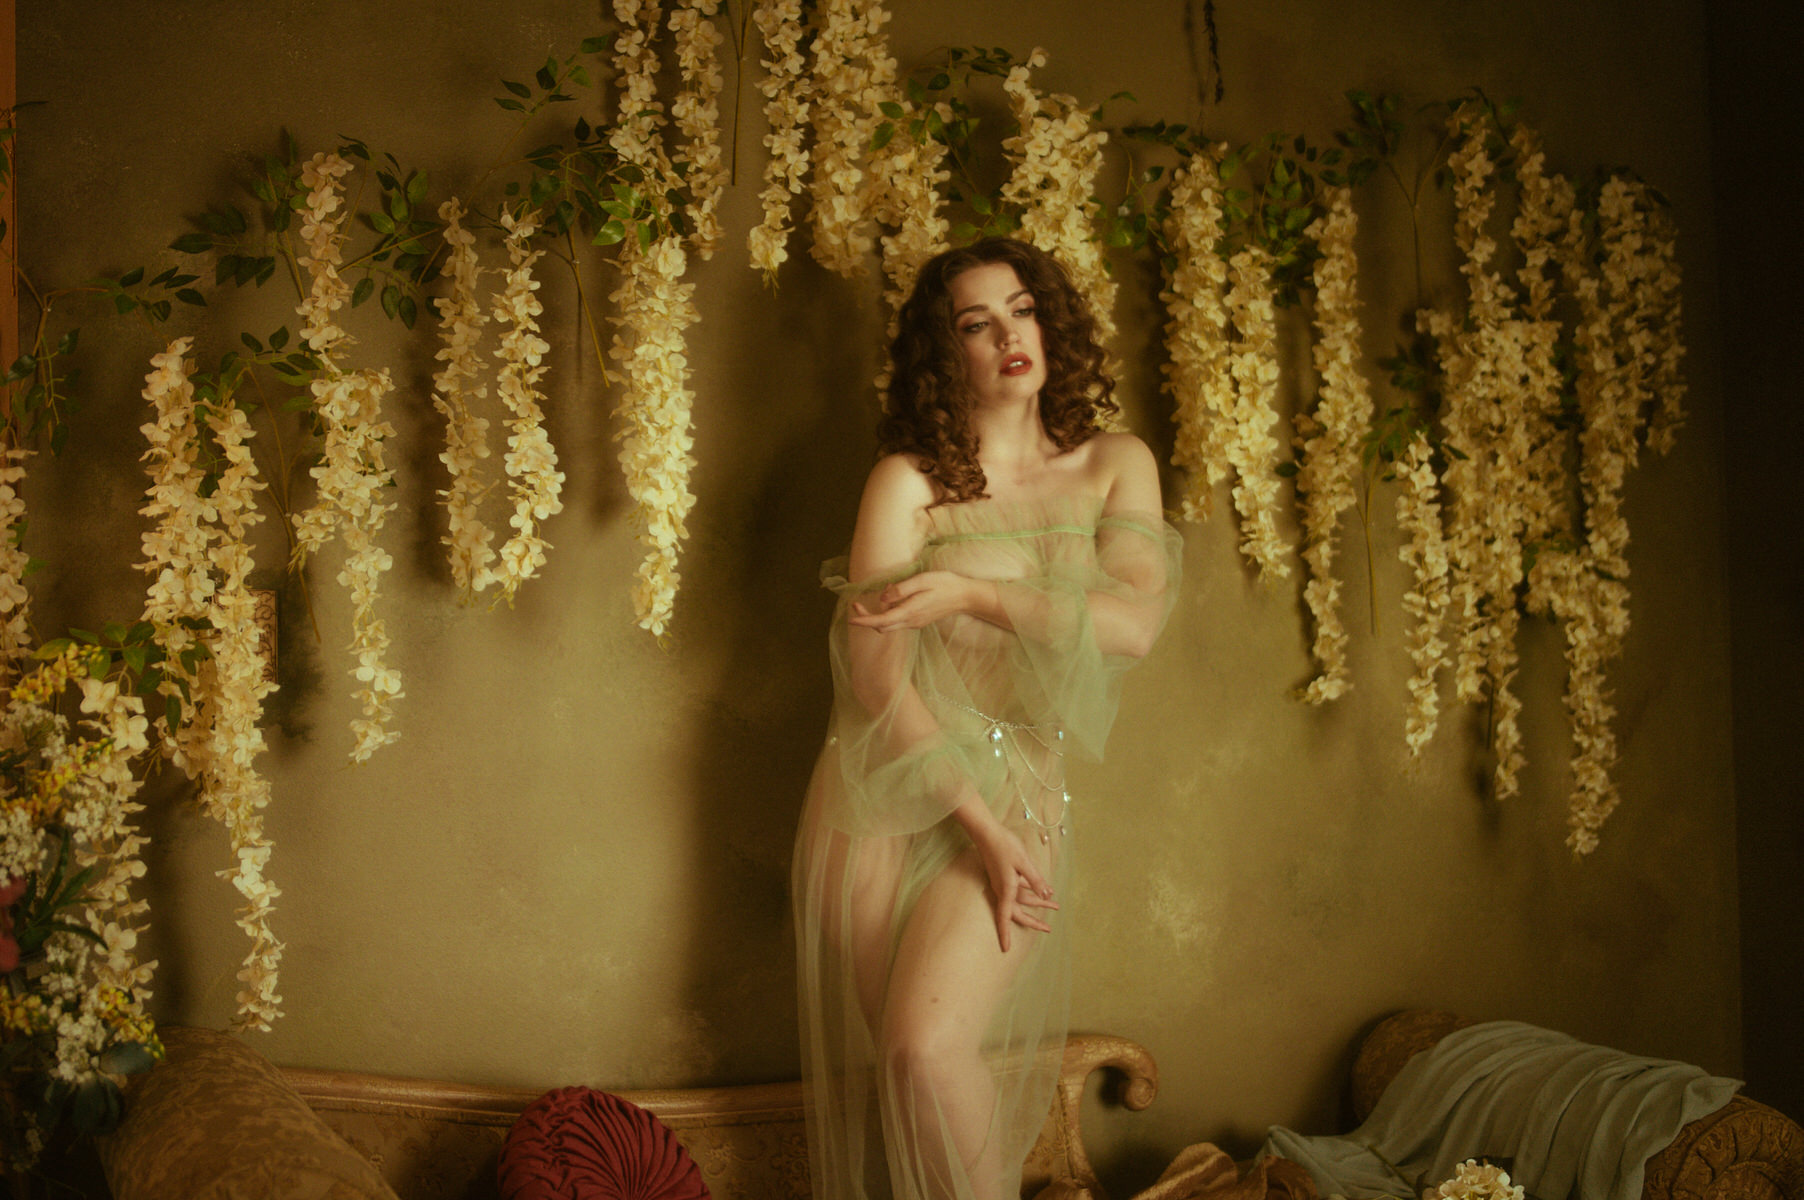 A woman in a sheer dress posing in front of flowers for a fine art boudoir photography session in Dallas.